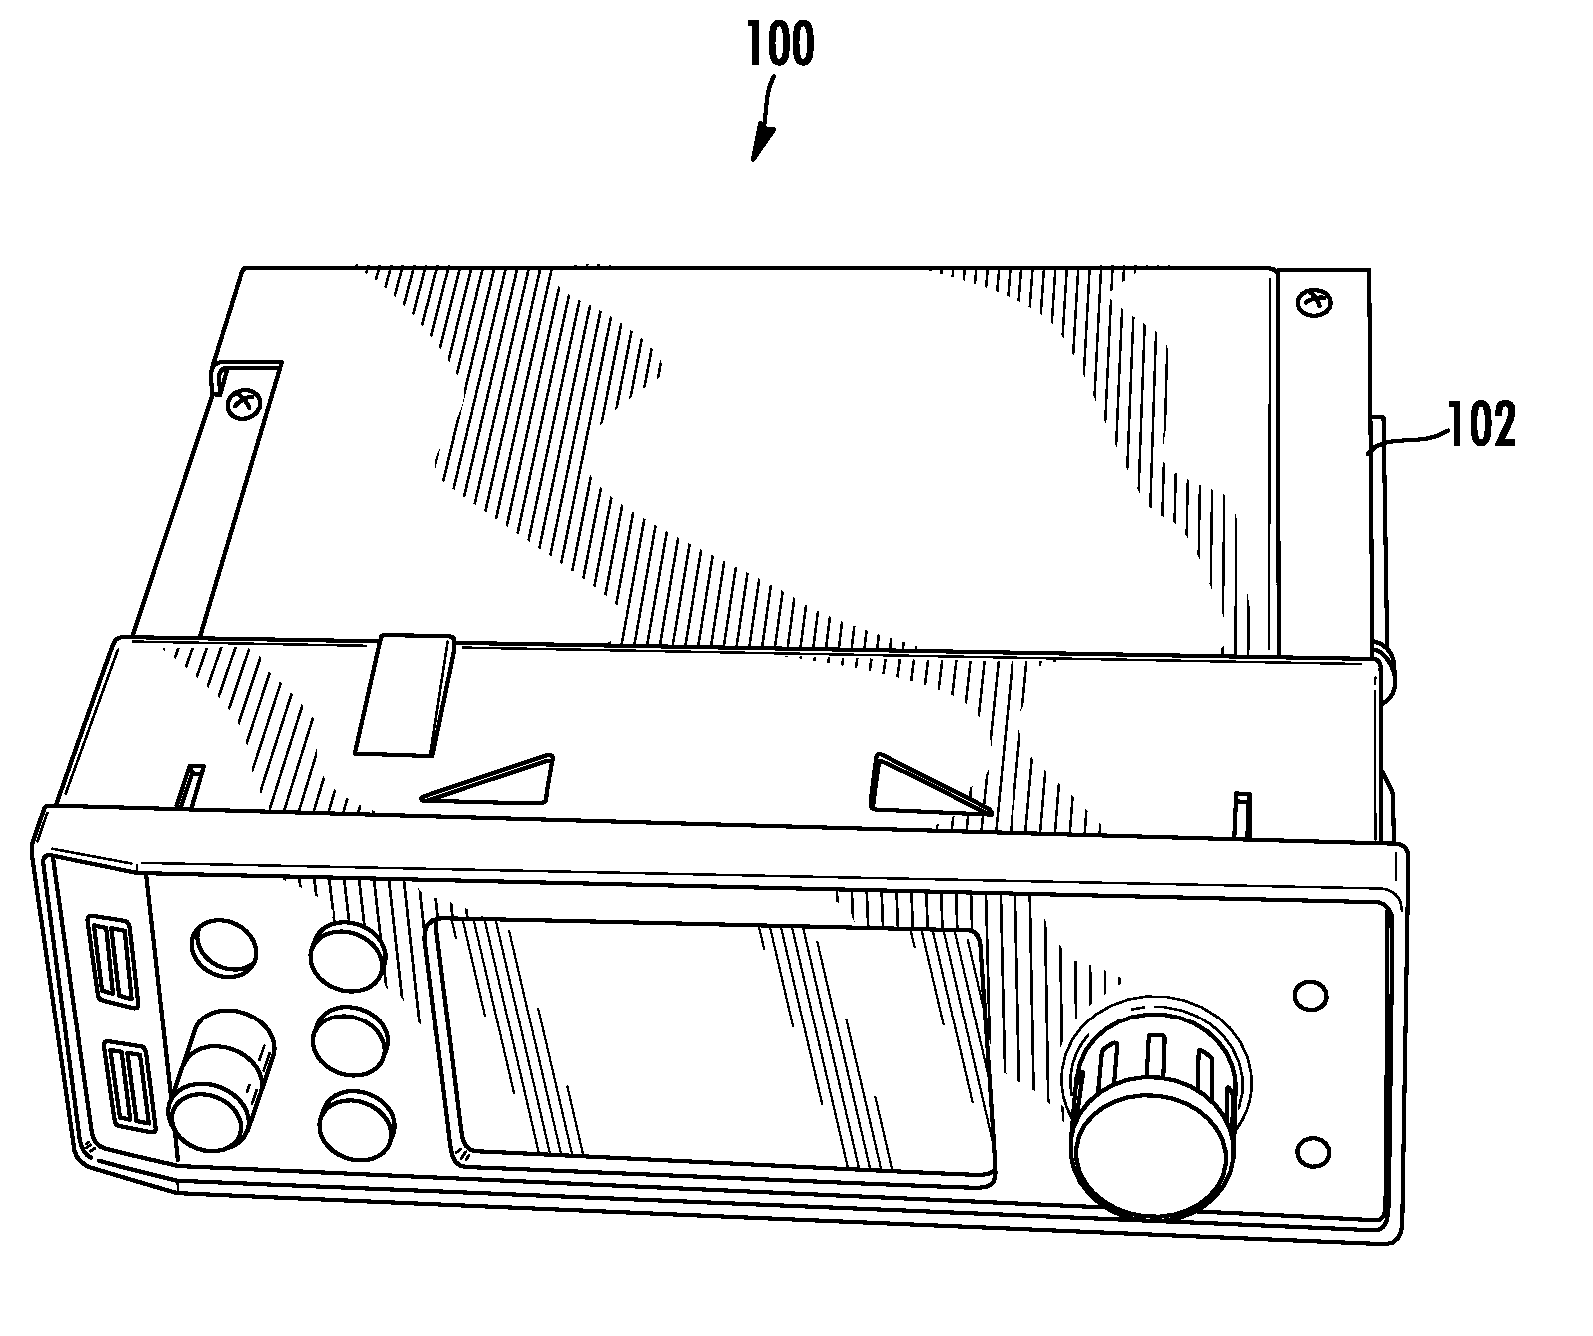 Control unit for off-road vehicles including housing configured to fit within pre-existing cavity of off-road-vehicle cab